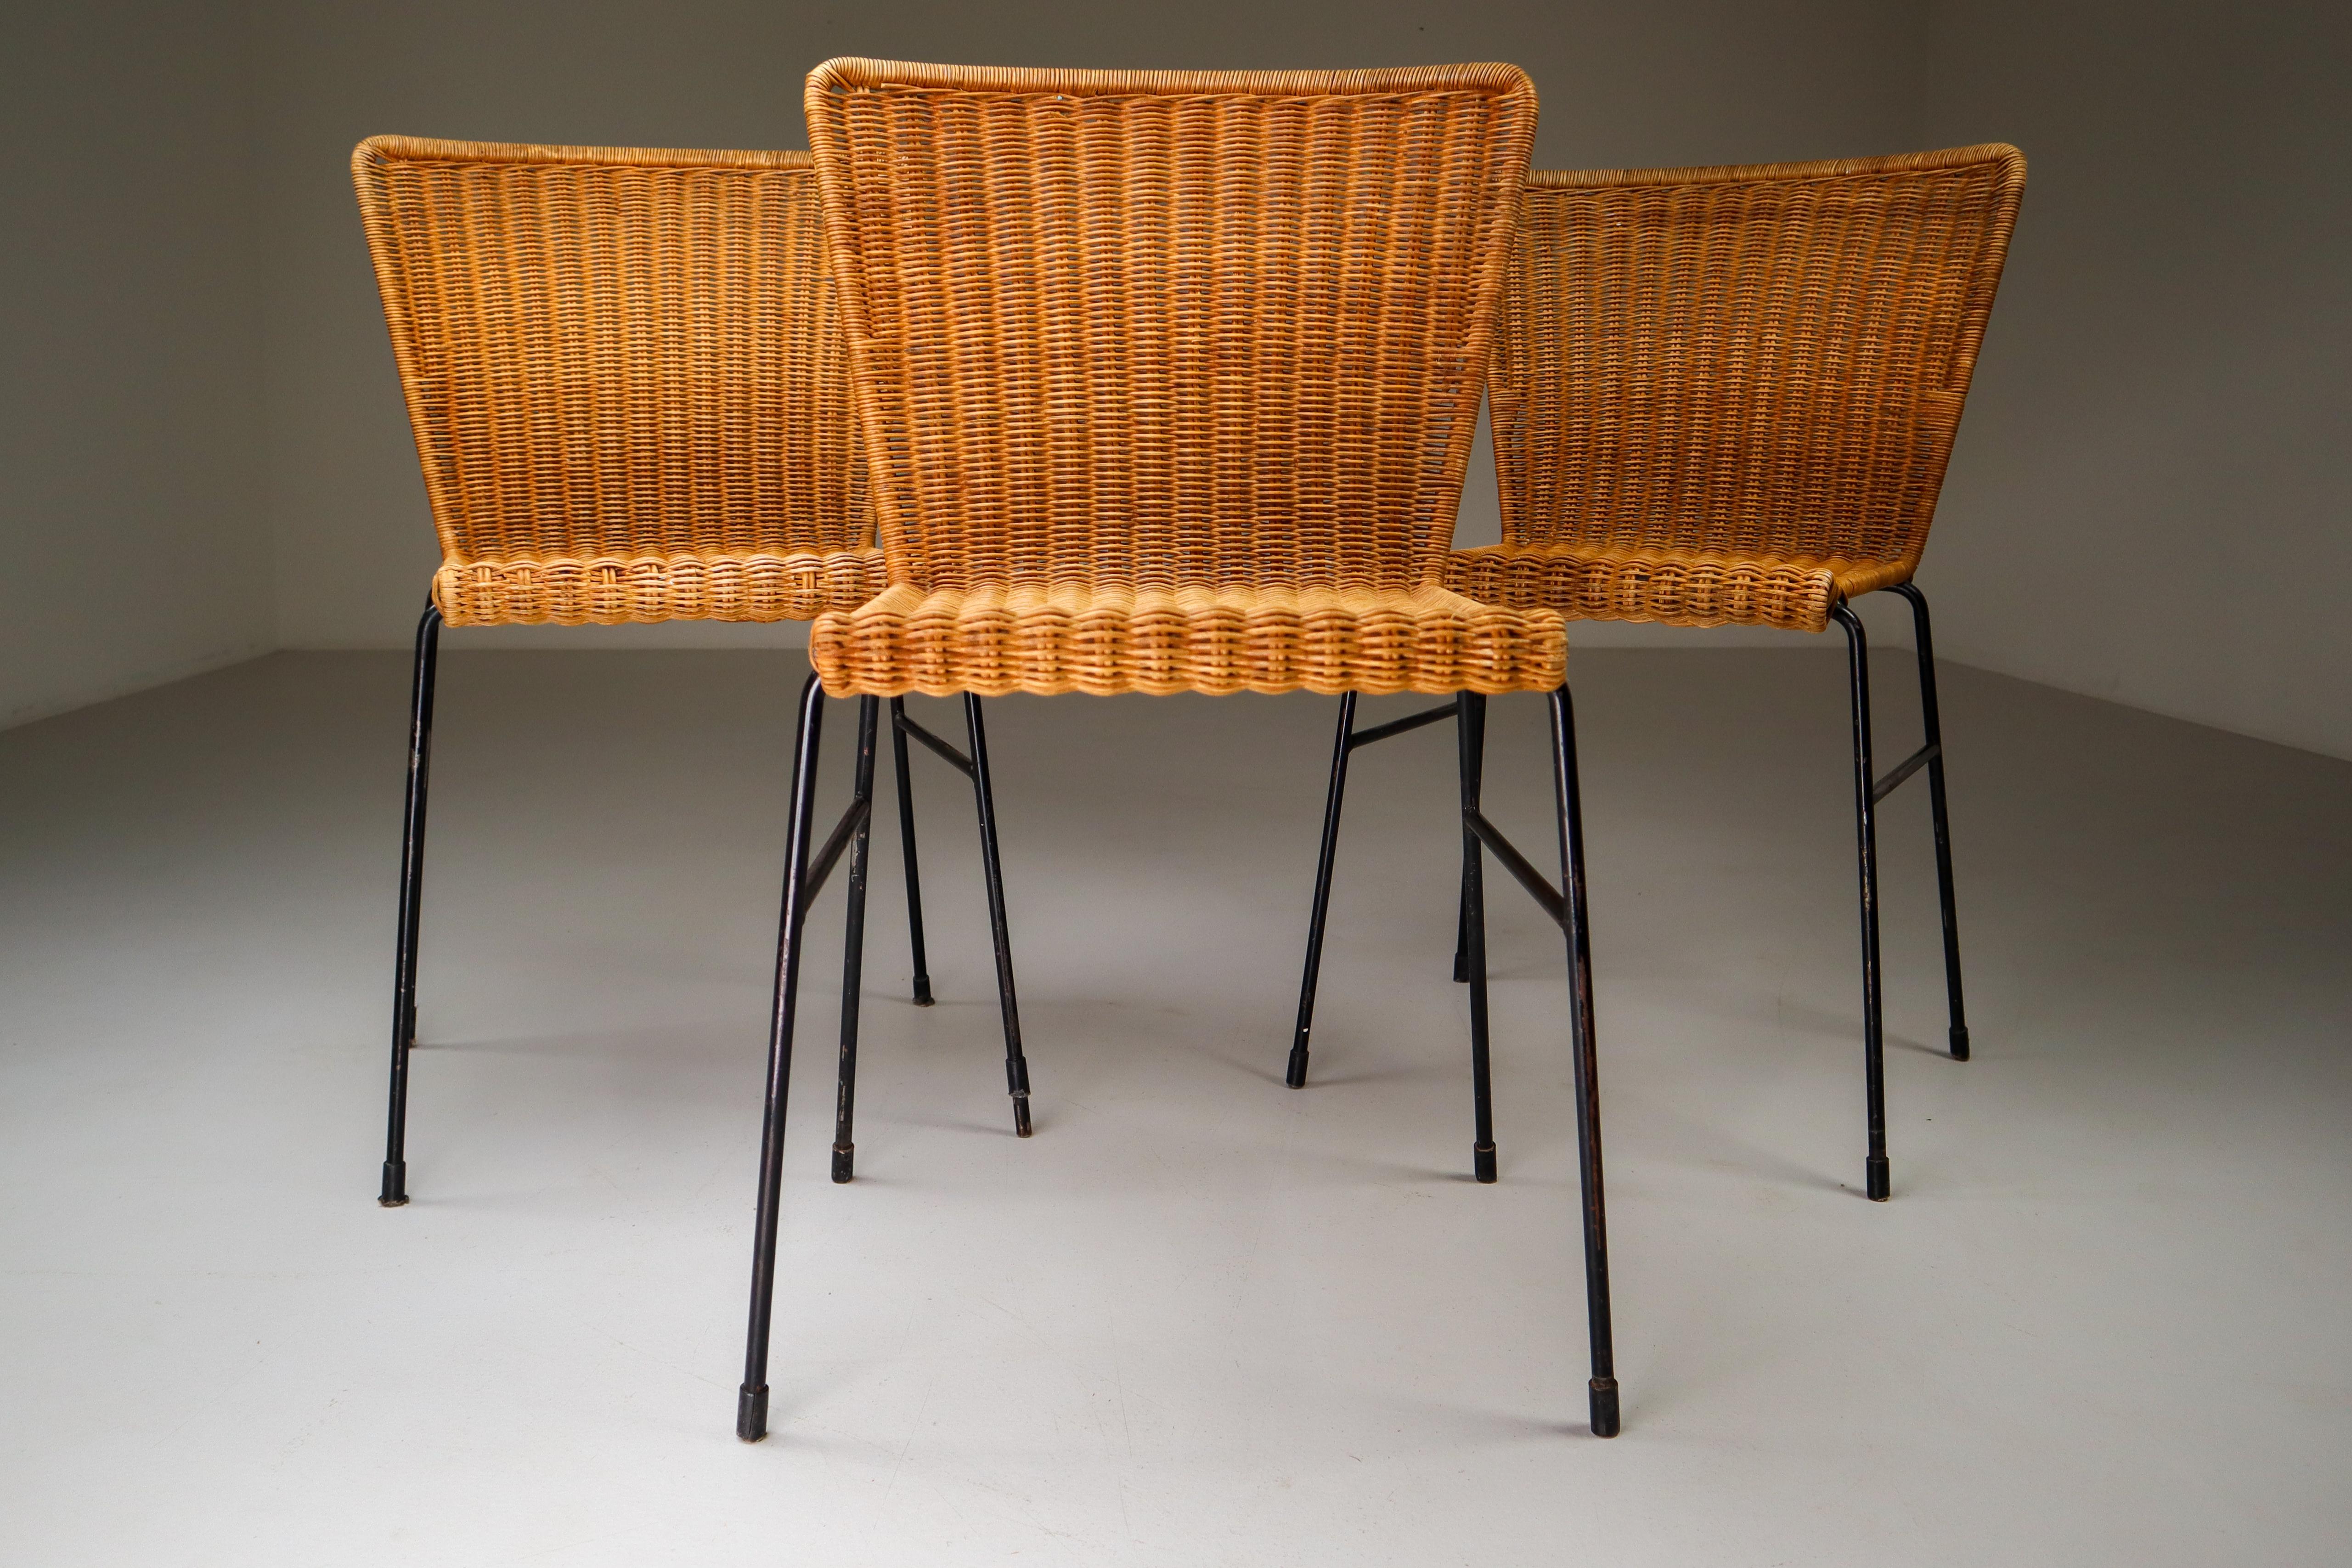 Patinated Metal Framed chairs with Woven Wicker Seat, The Netherlands, 1950 1